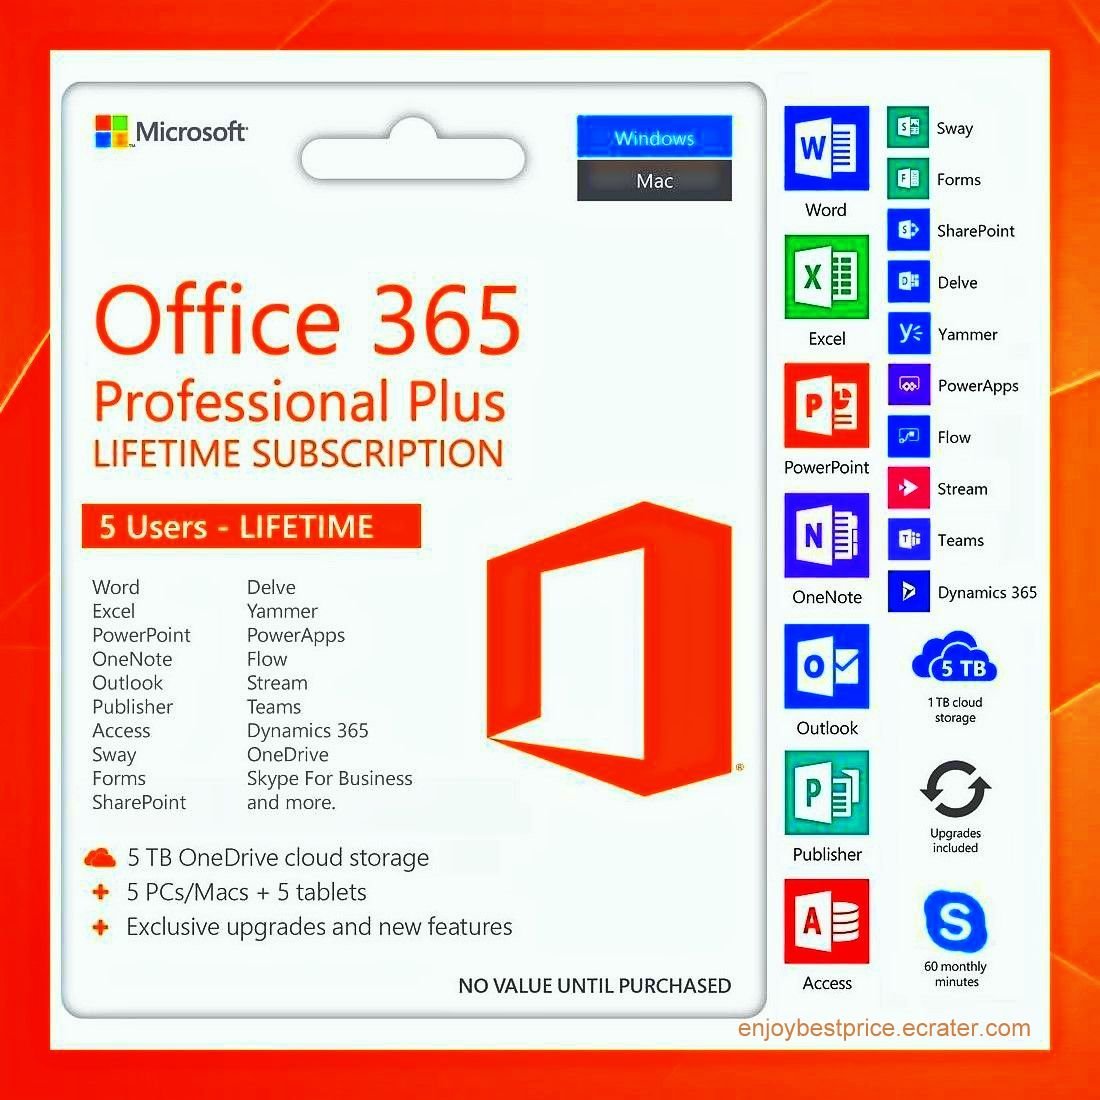 how to activate office 365 for lifetime free using kms server